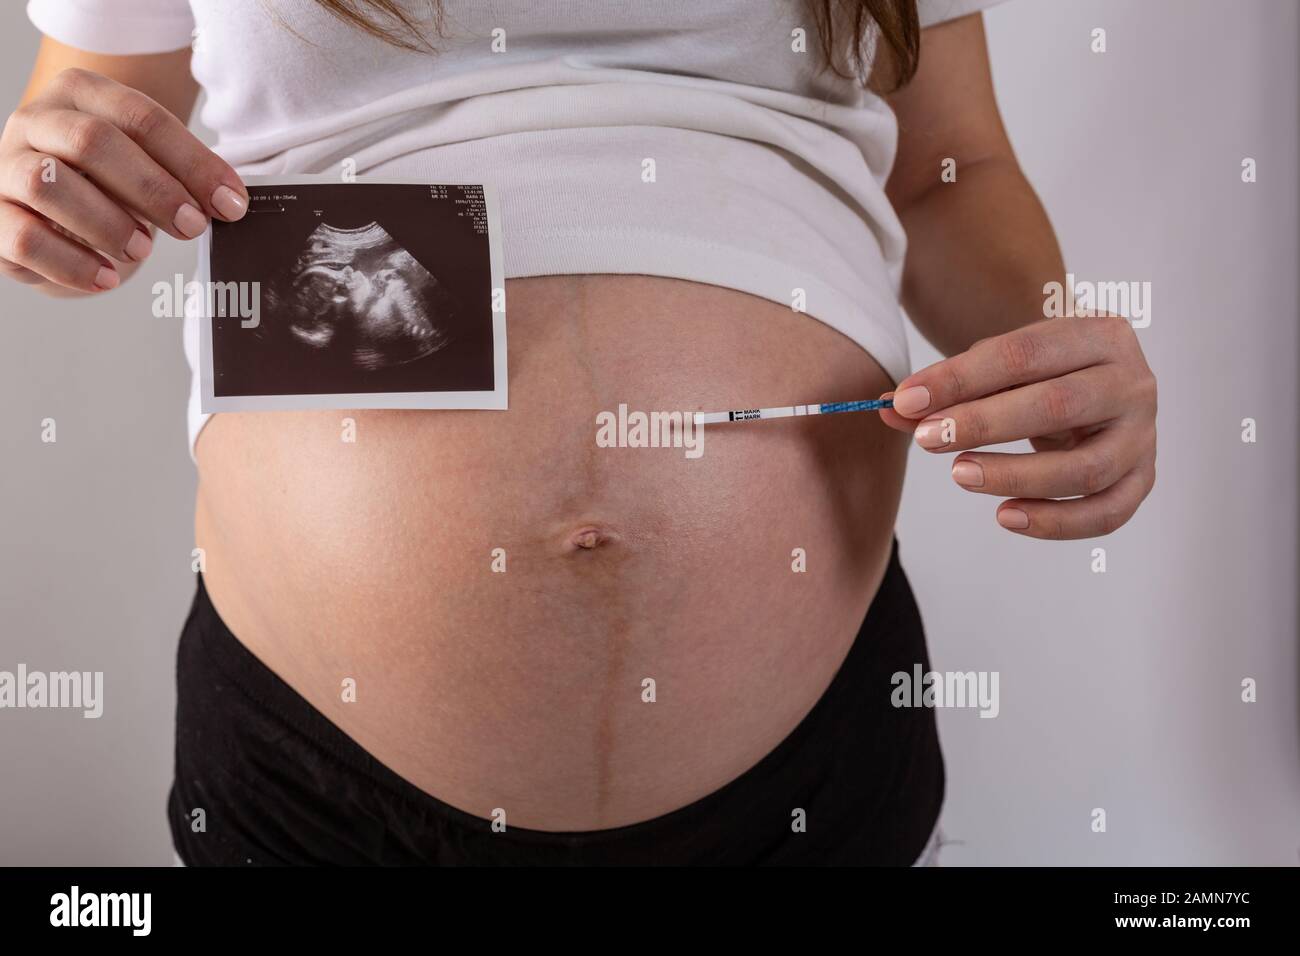 positive pregnancy test in woman hands close up Stock Photo